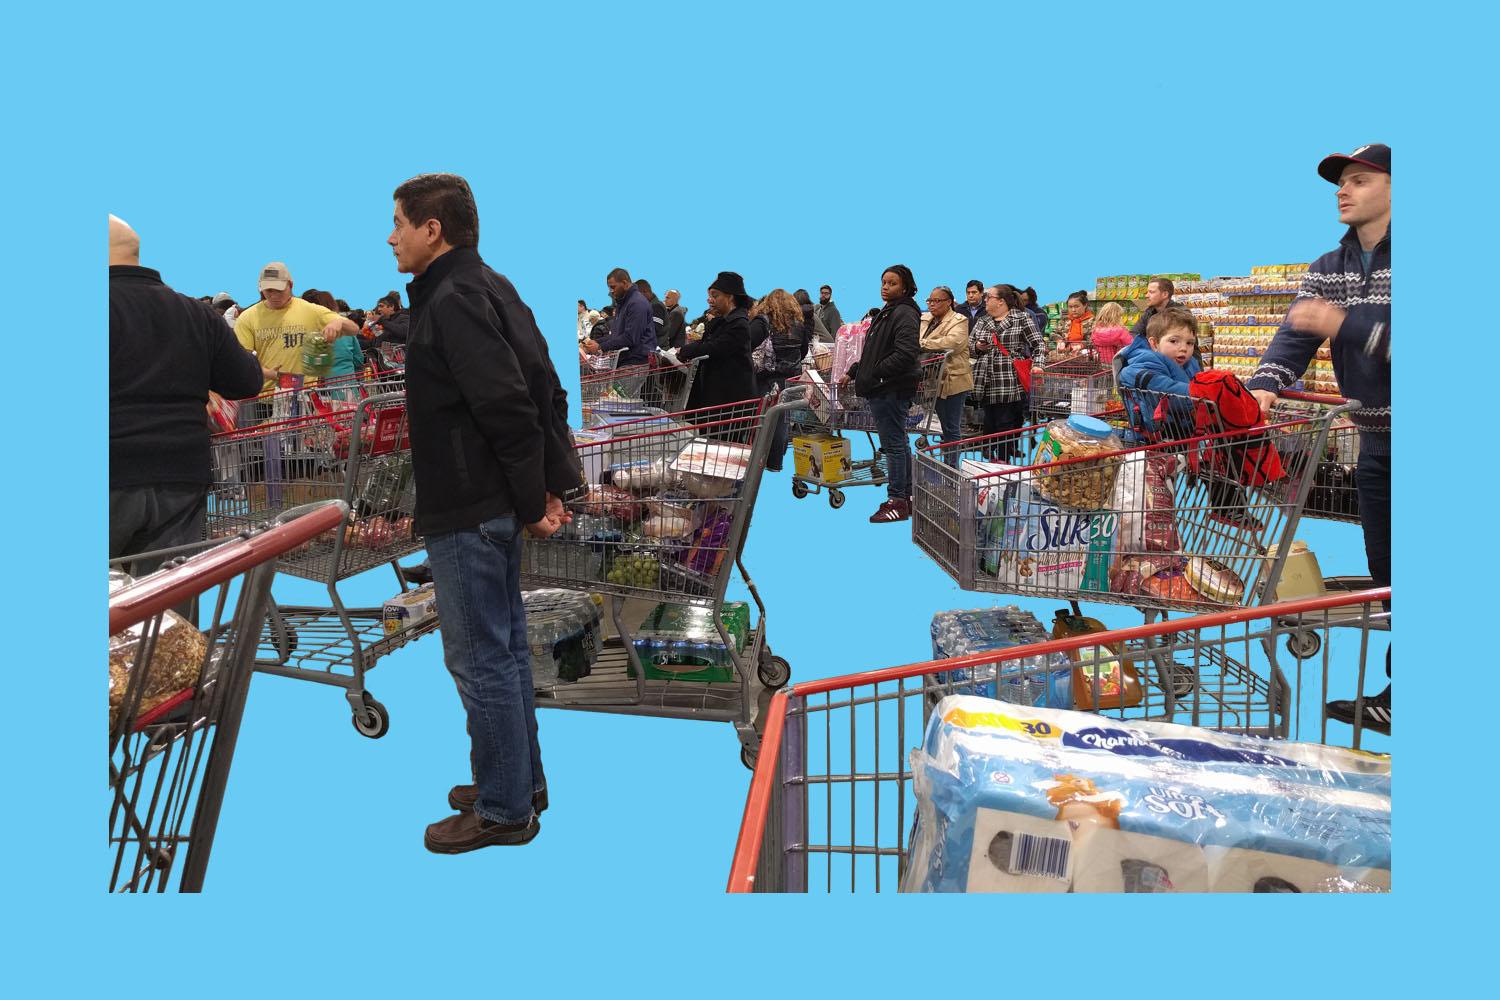 Thumbnail for "The Moral Calculus Of Buying Food During A Pandemic".